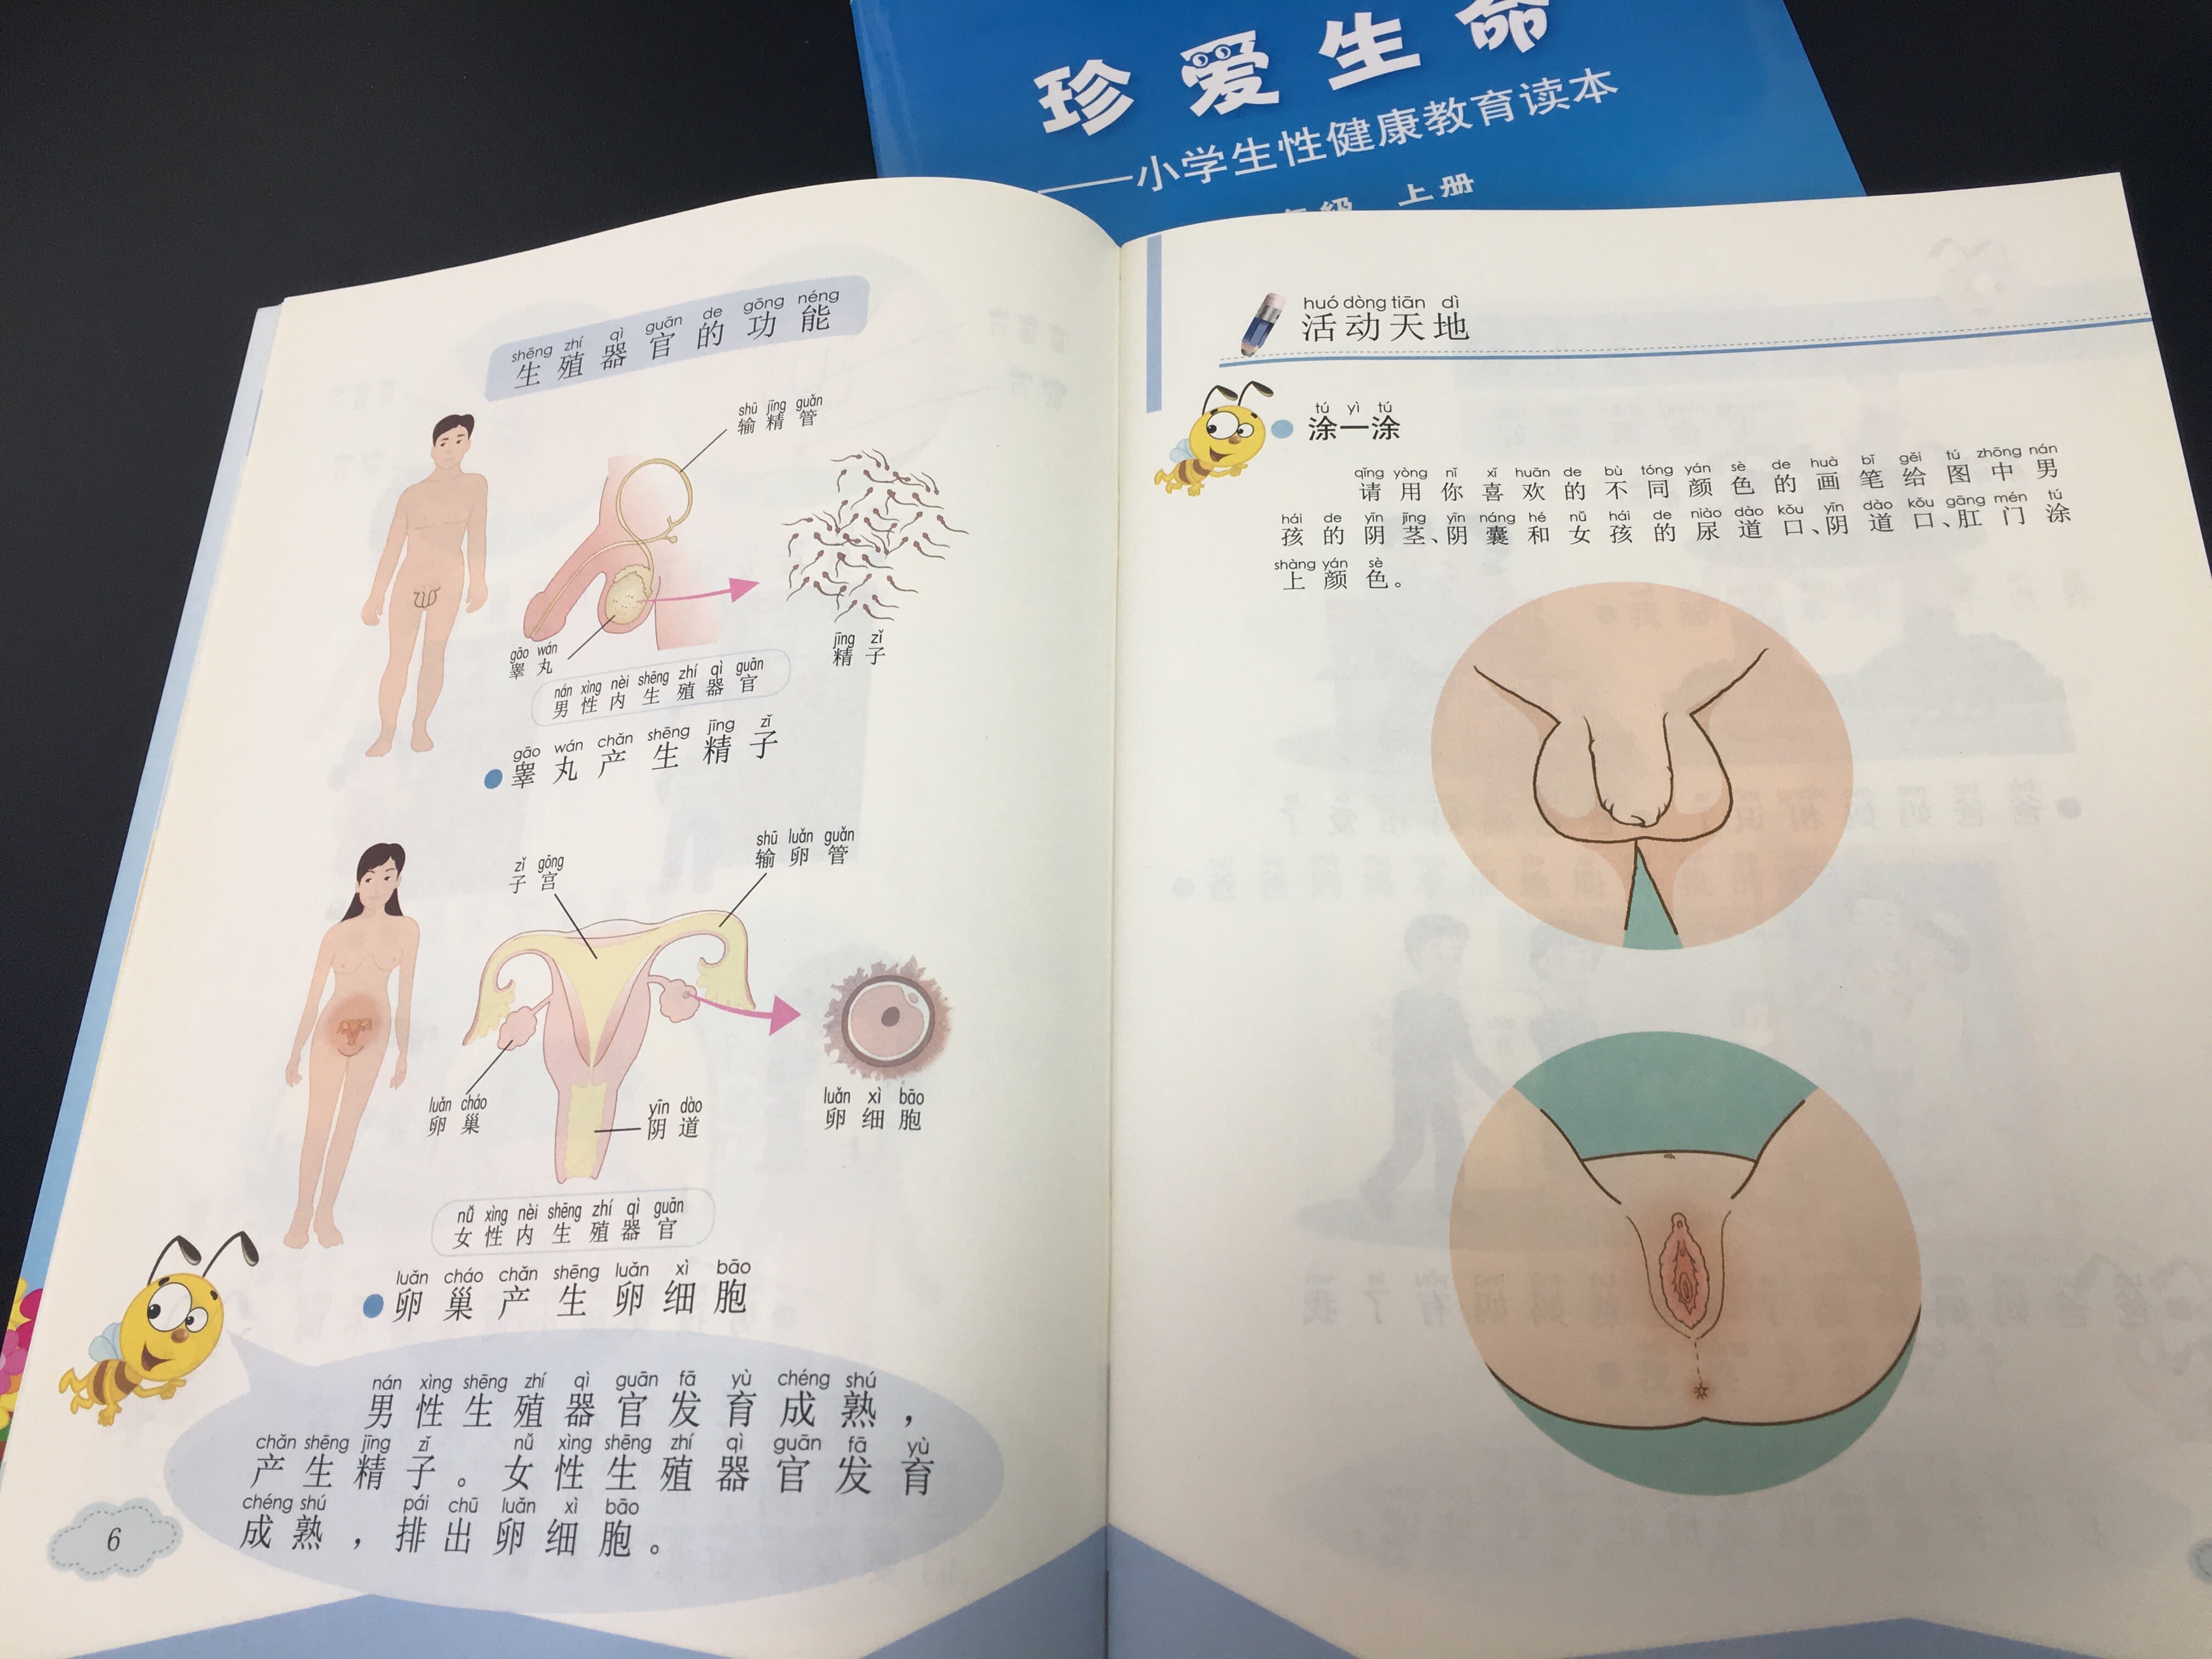 China Sex School - Shock and praise for groundbreaking sex-ed textbook in China | CNN